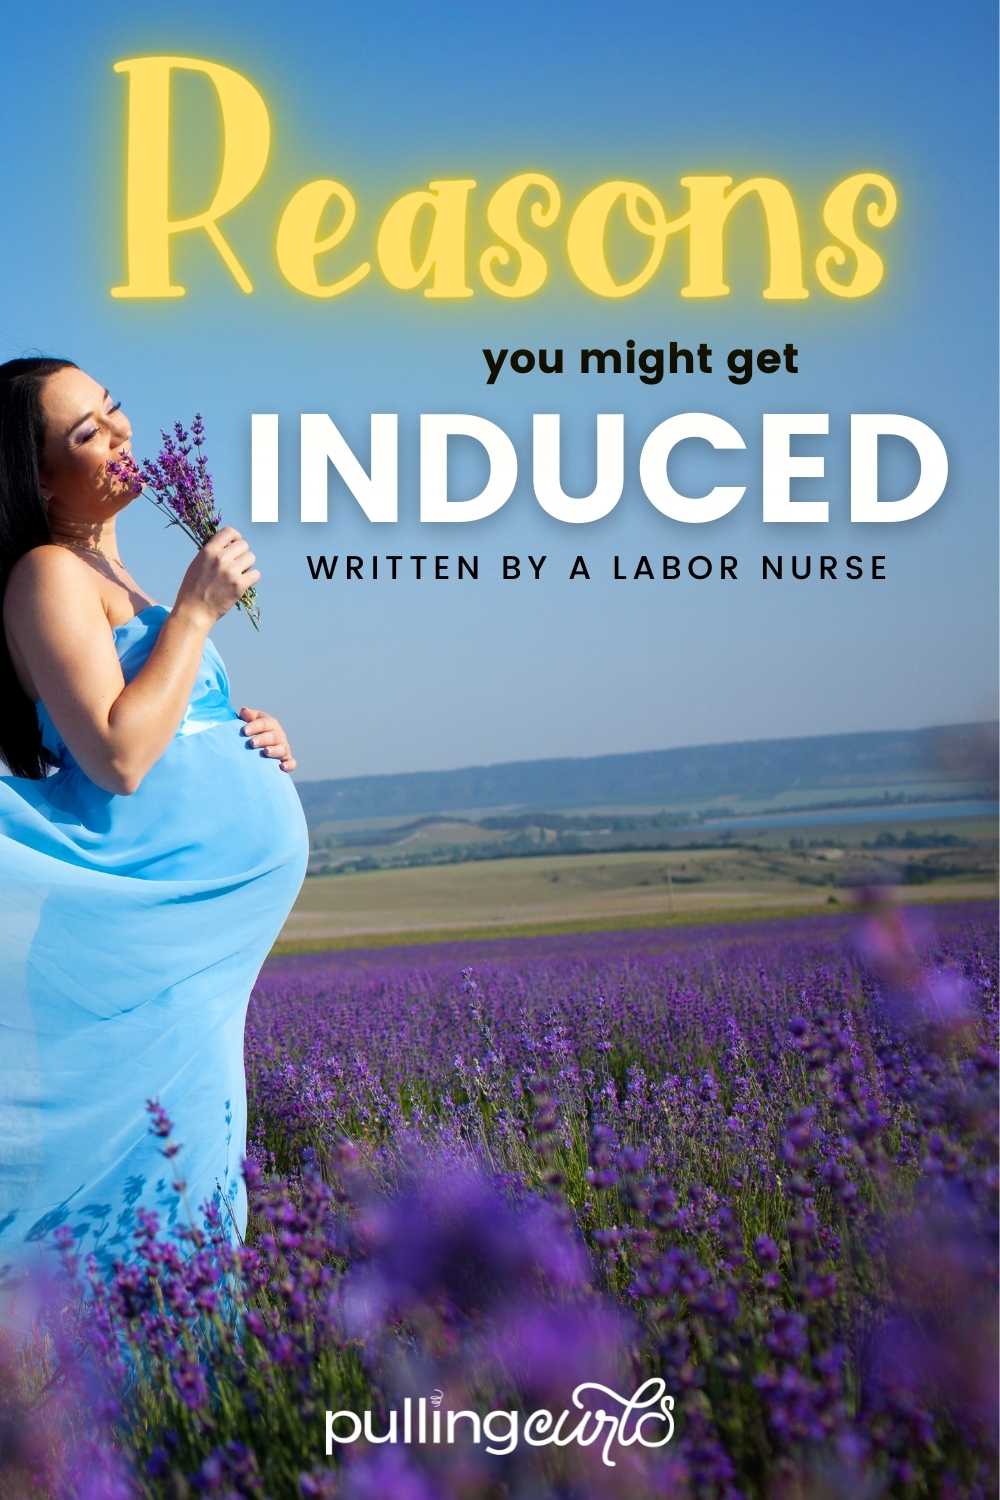 Why would someone be induced into labor? via @pullingcurls